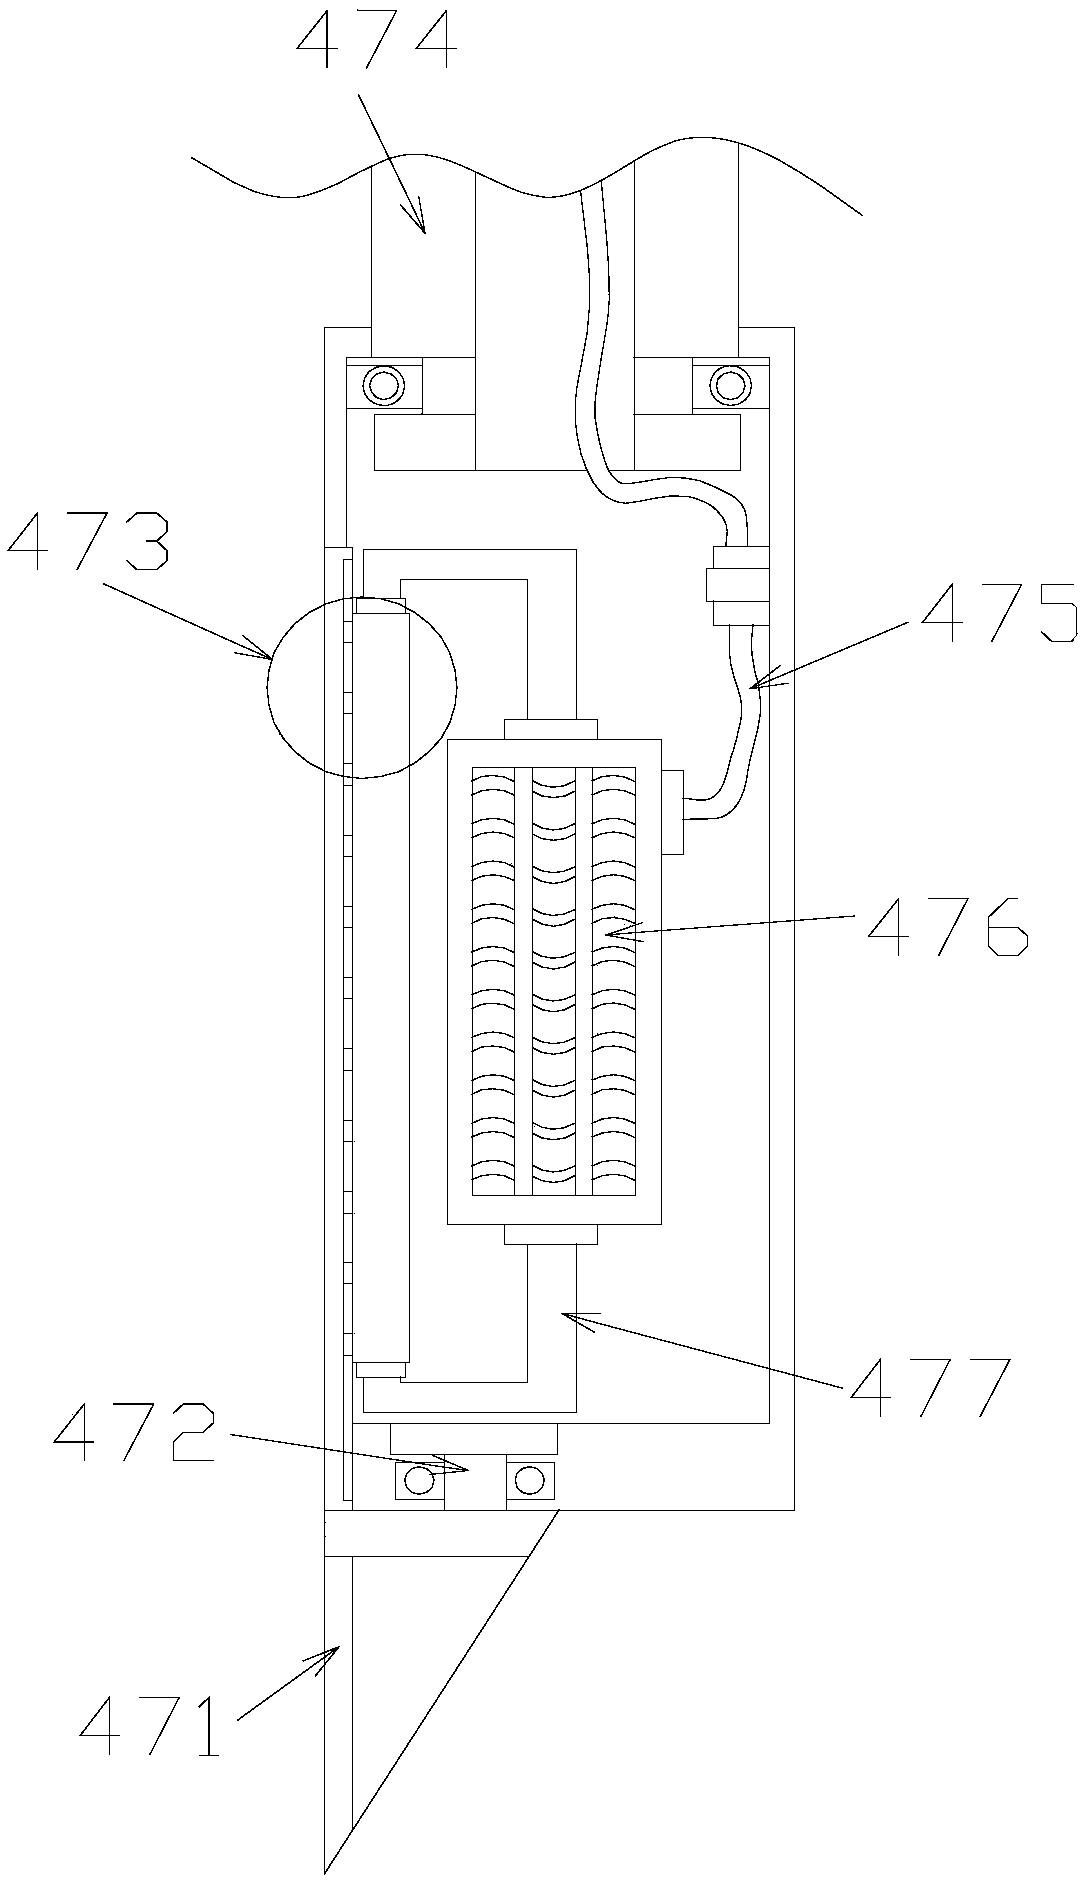 Fabric cutting device capable of preventing scattering of weaved watchband and difficult in machining process